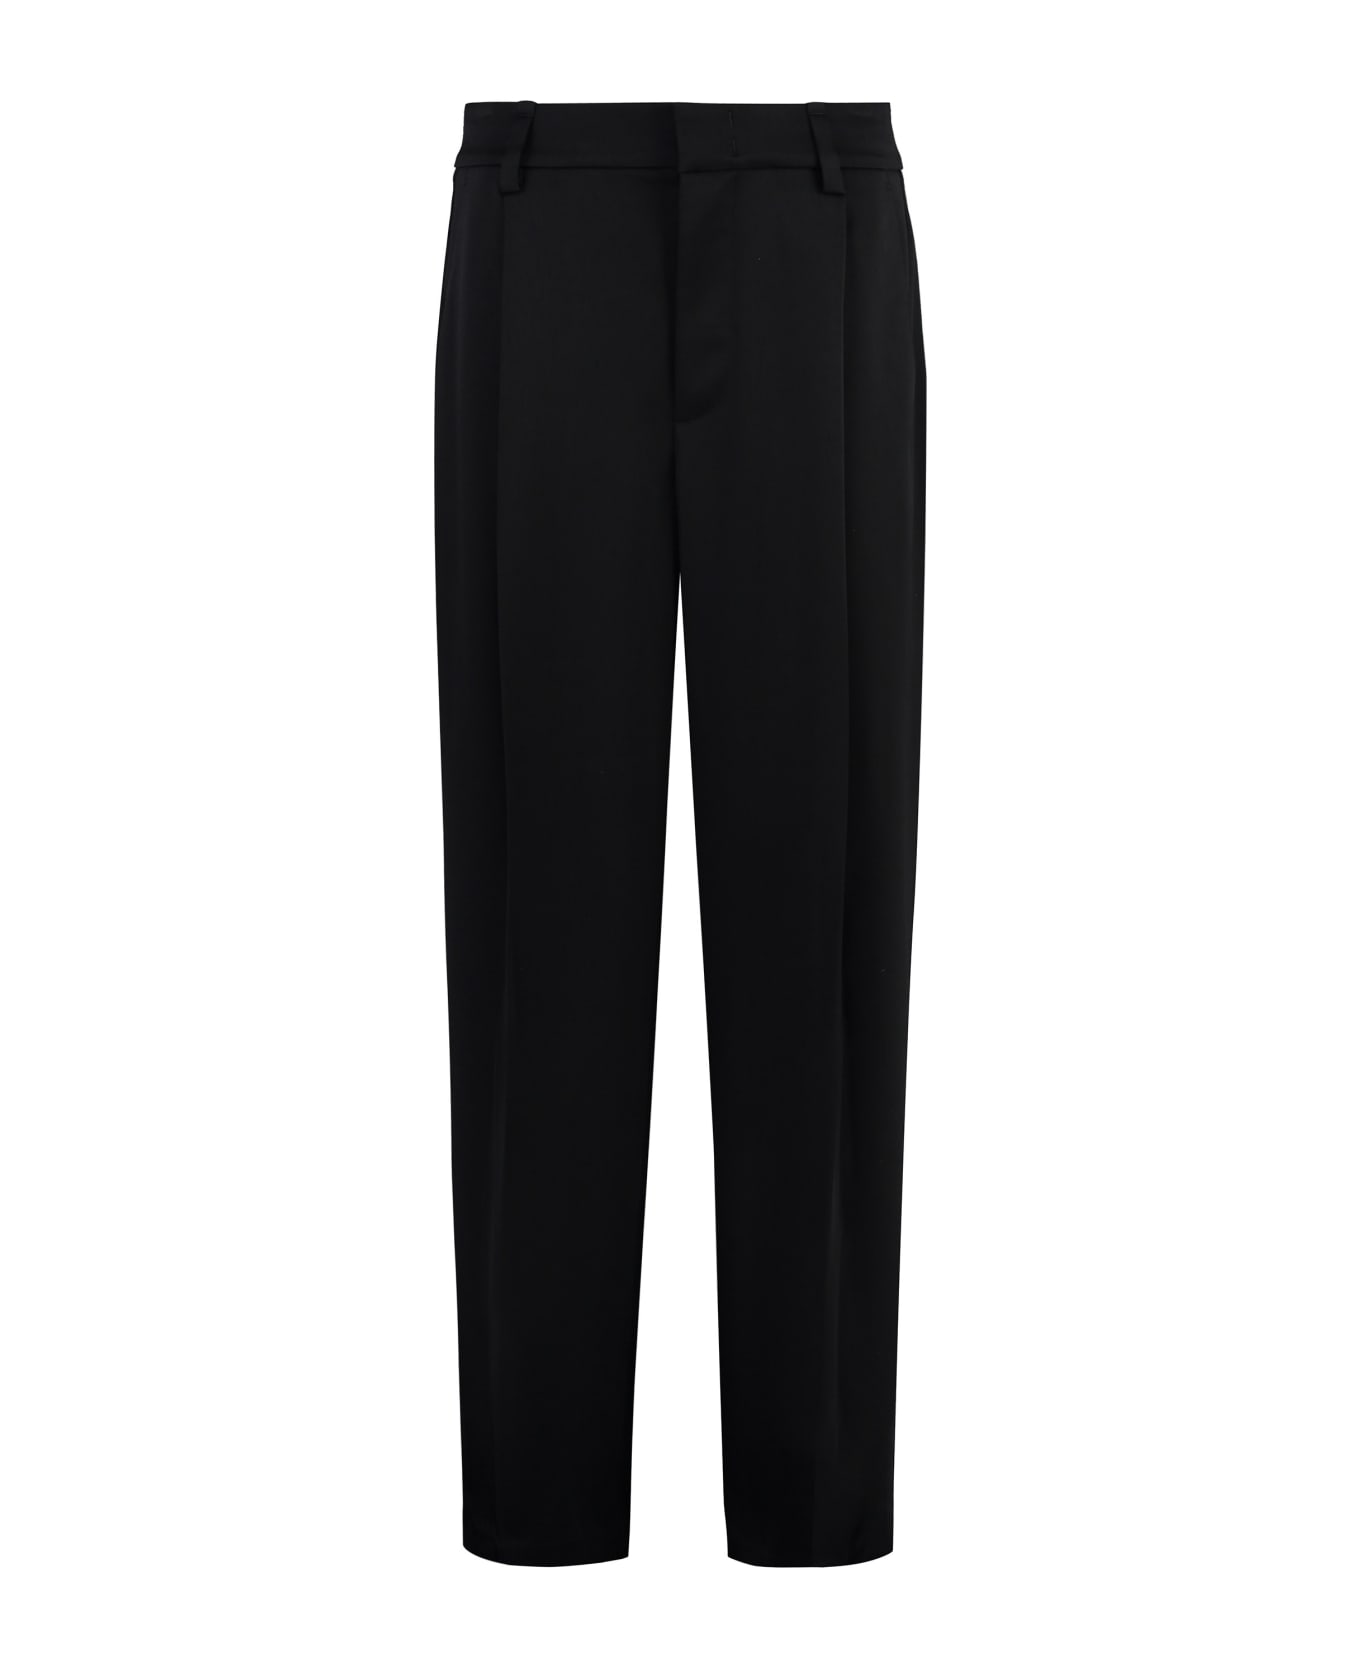 Vince Satin Trousers - Blk Black ボトムス